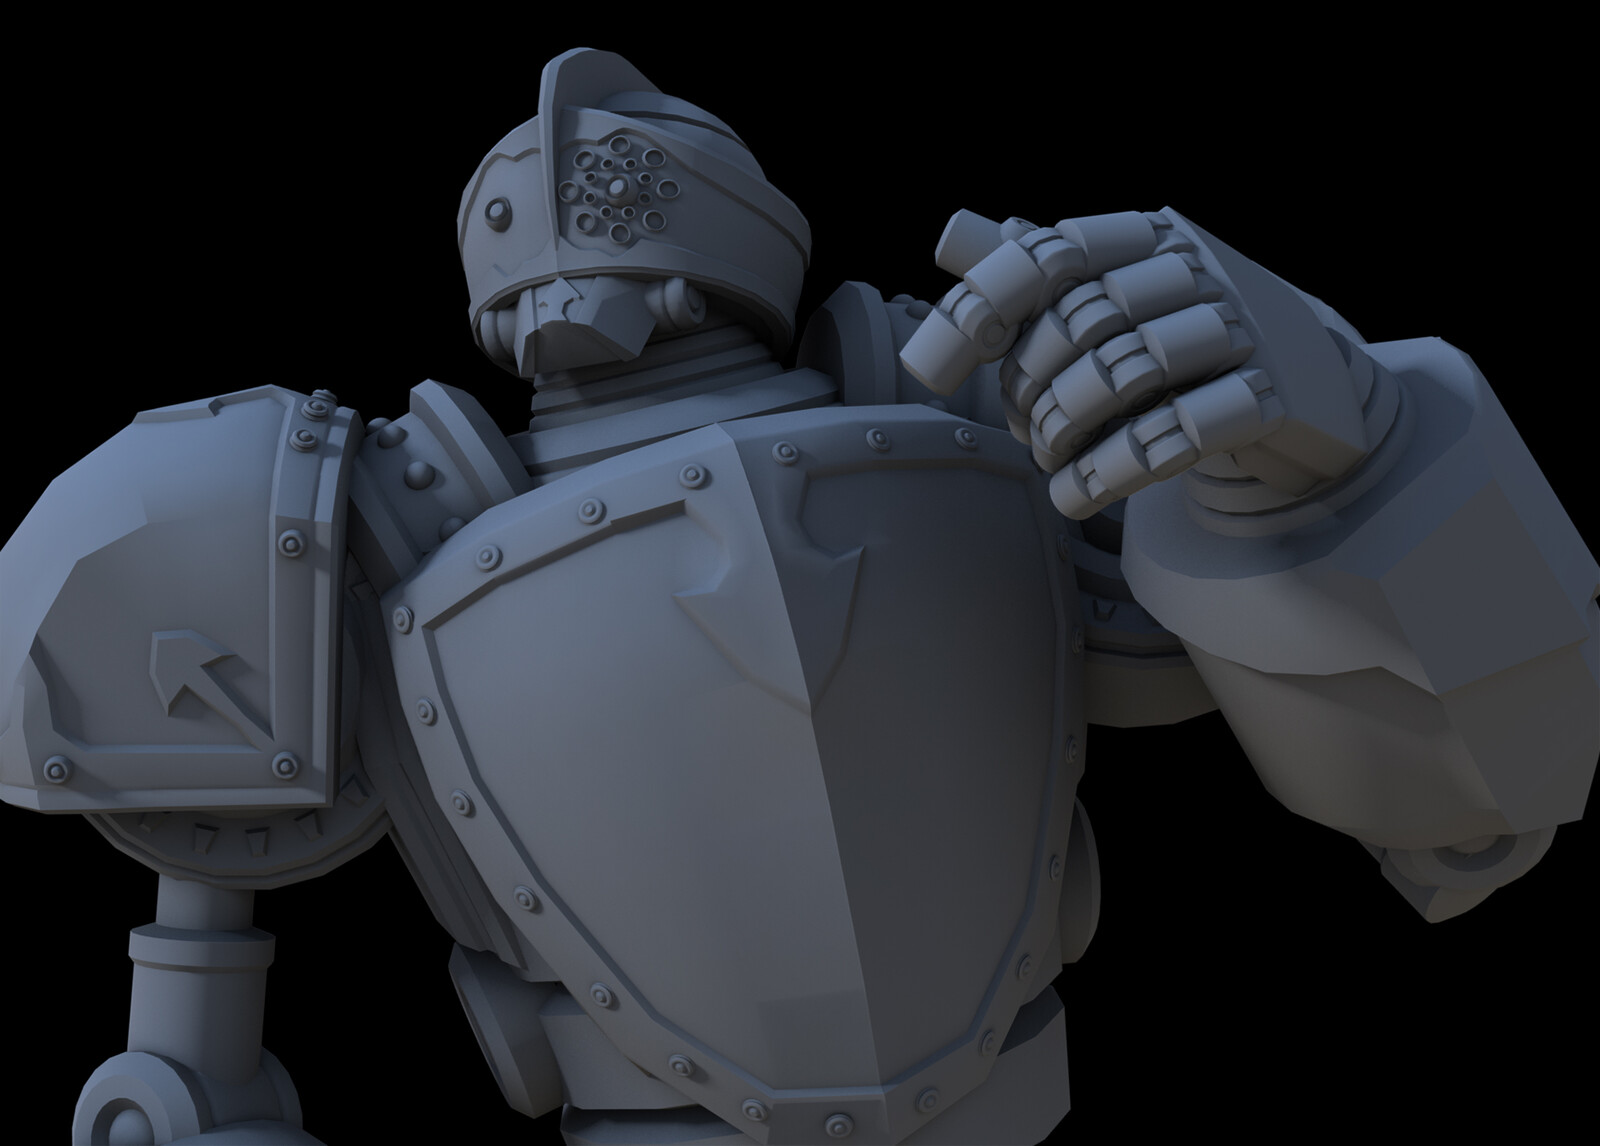 The render of the robot reference